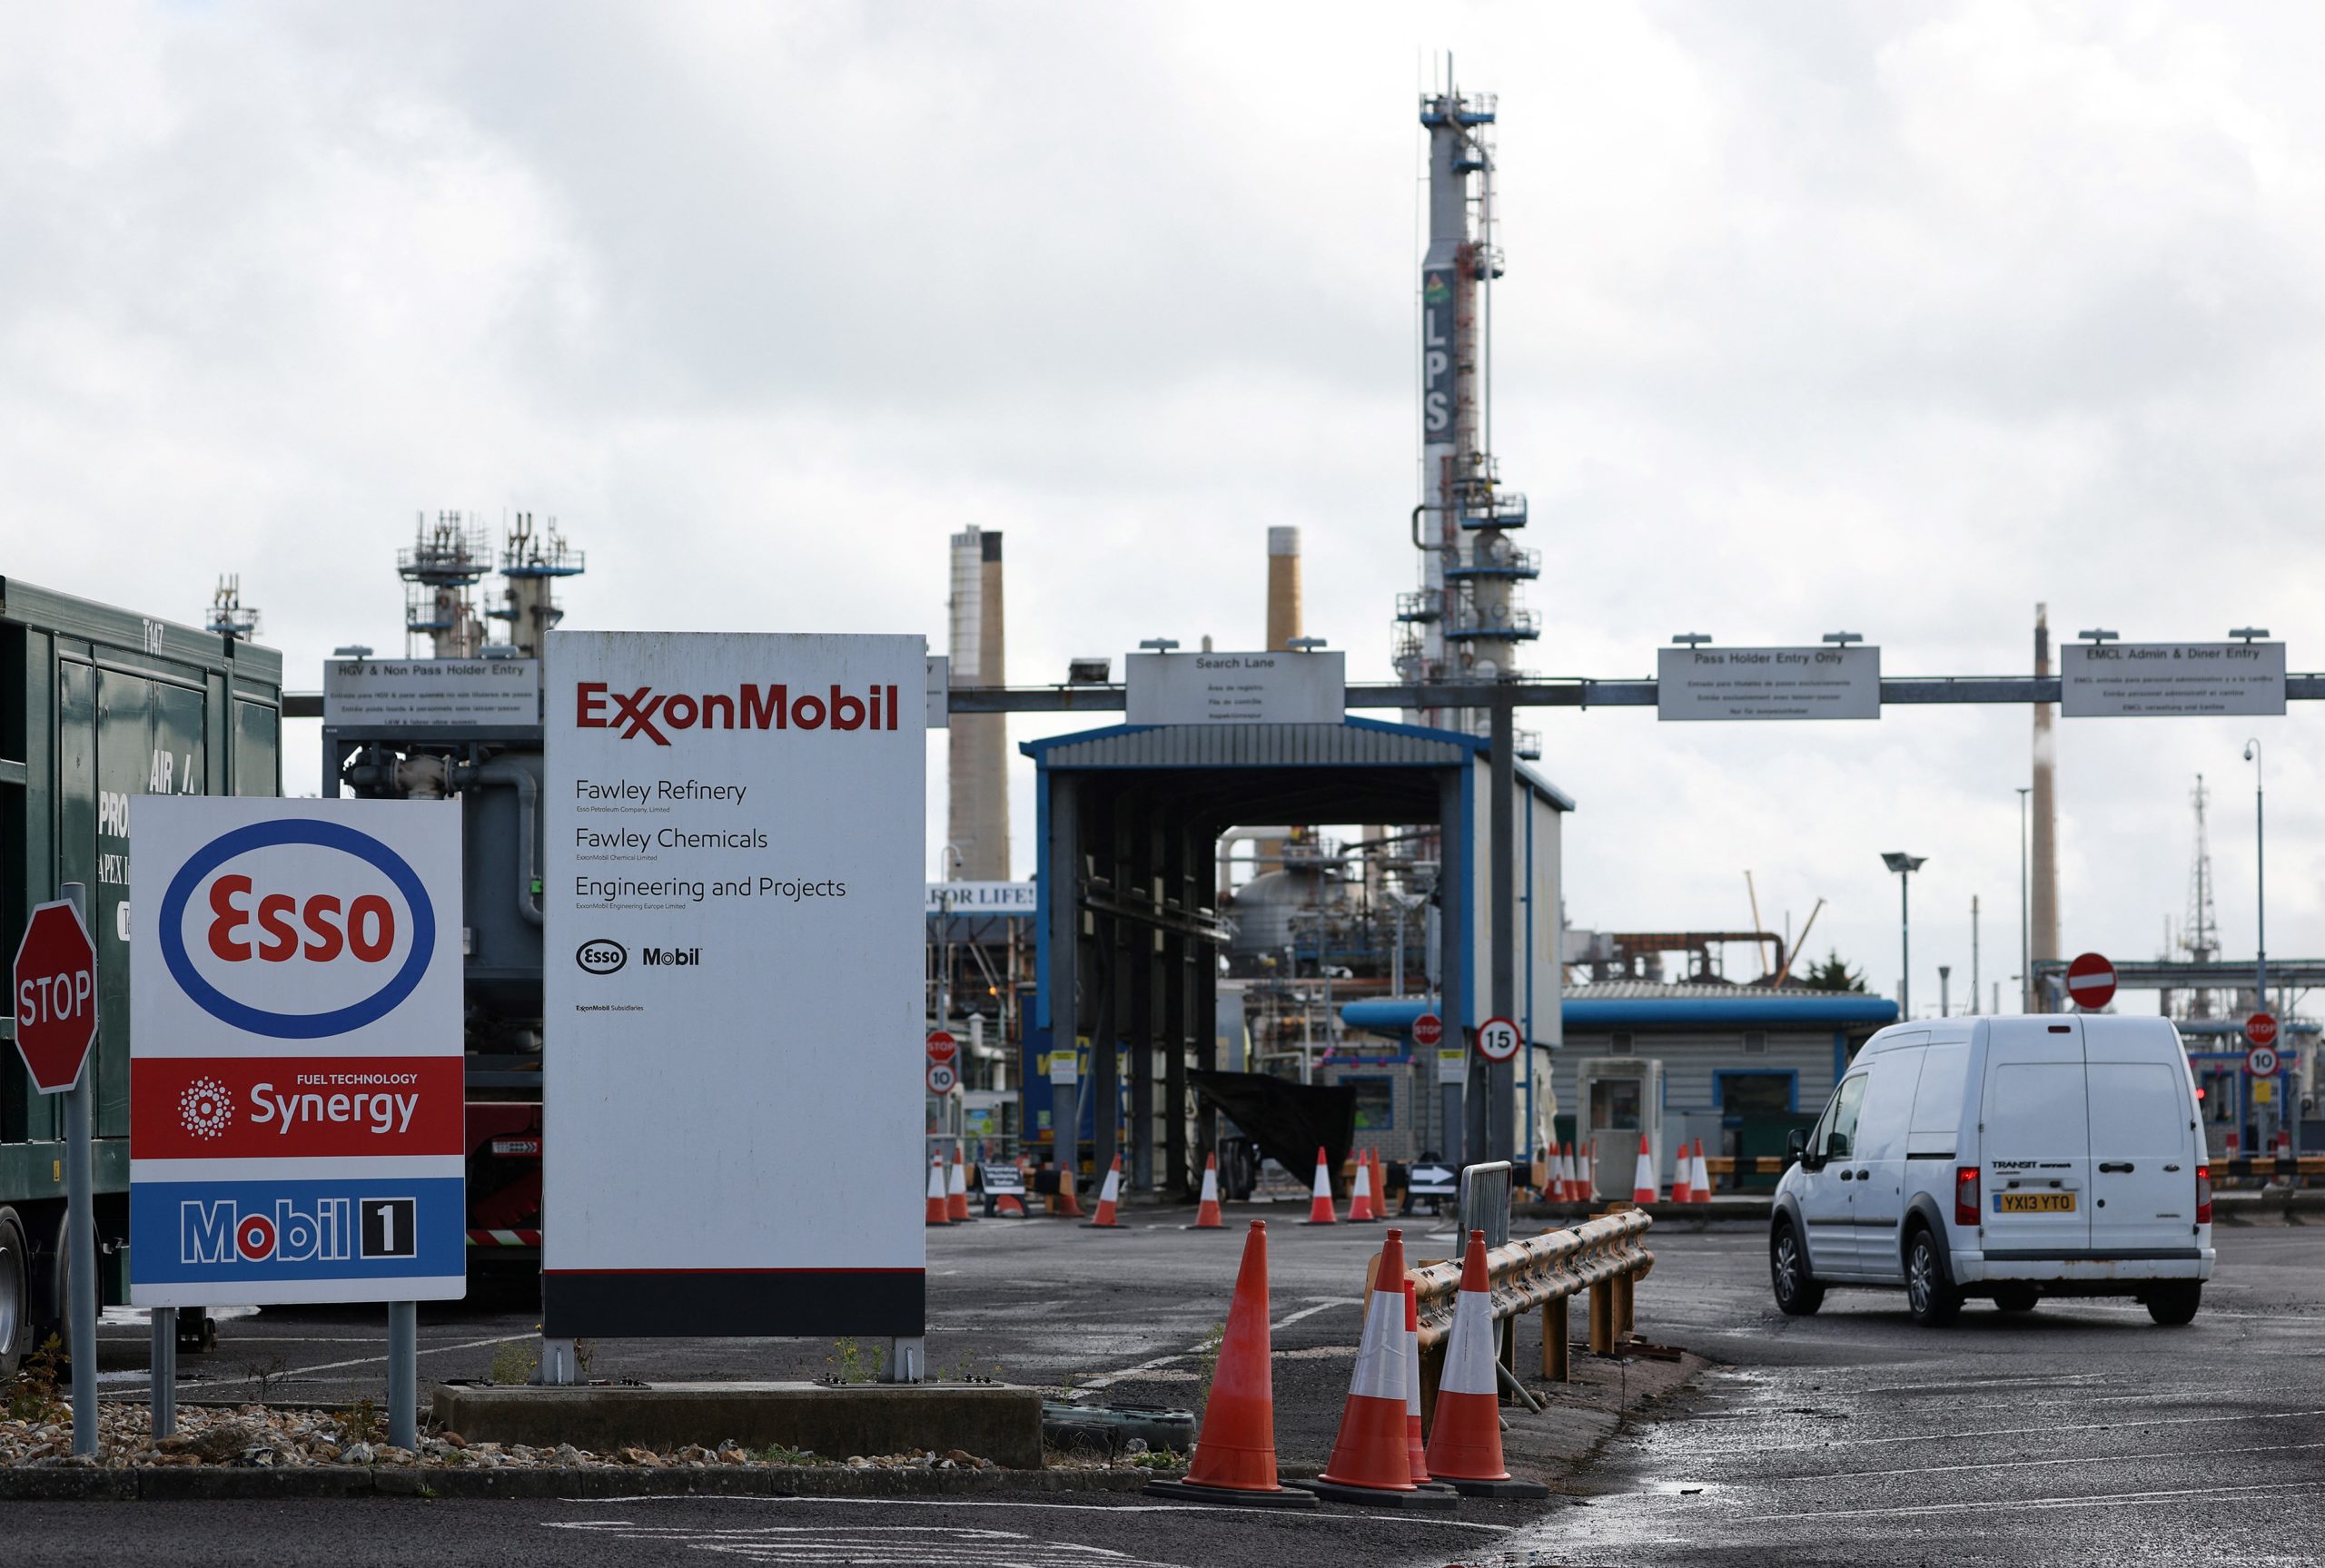 The ExxonMobil Esso Oil refinery is pictured in Fawley, England on Oct. 4. (Adrian Dennis/AFP via Getty Images)